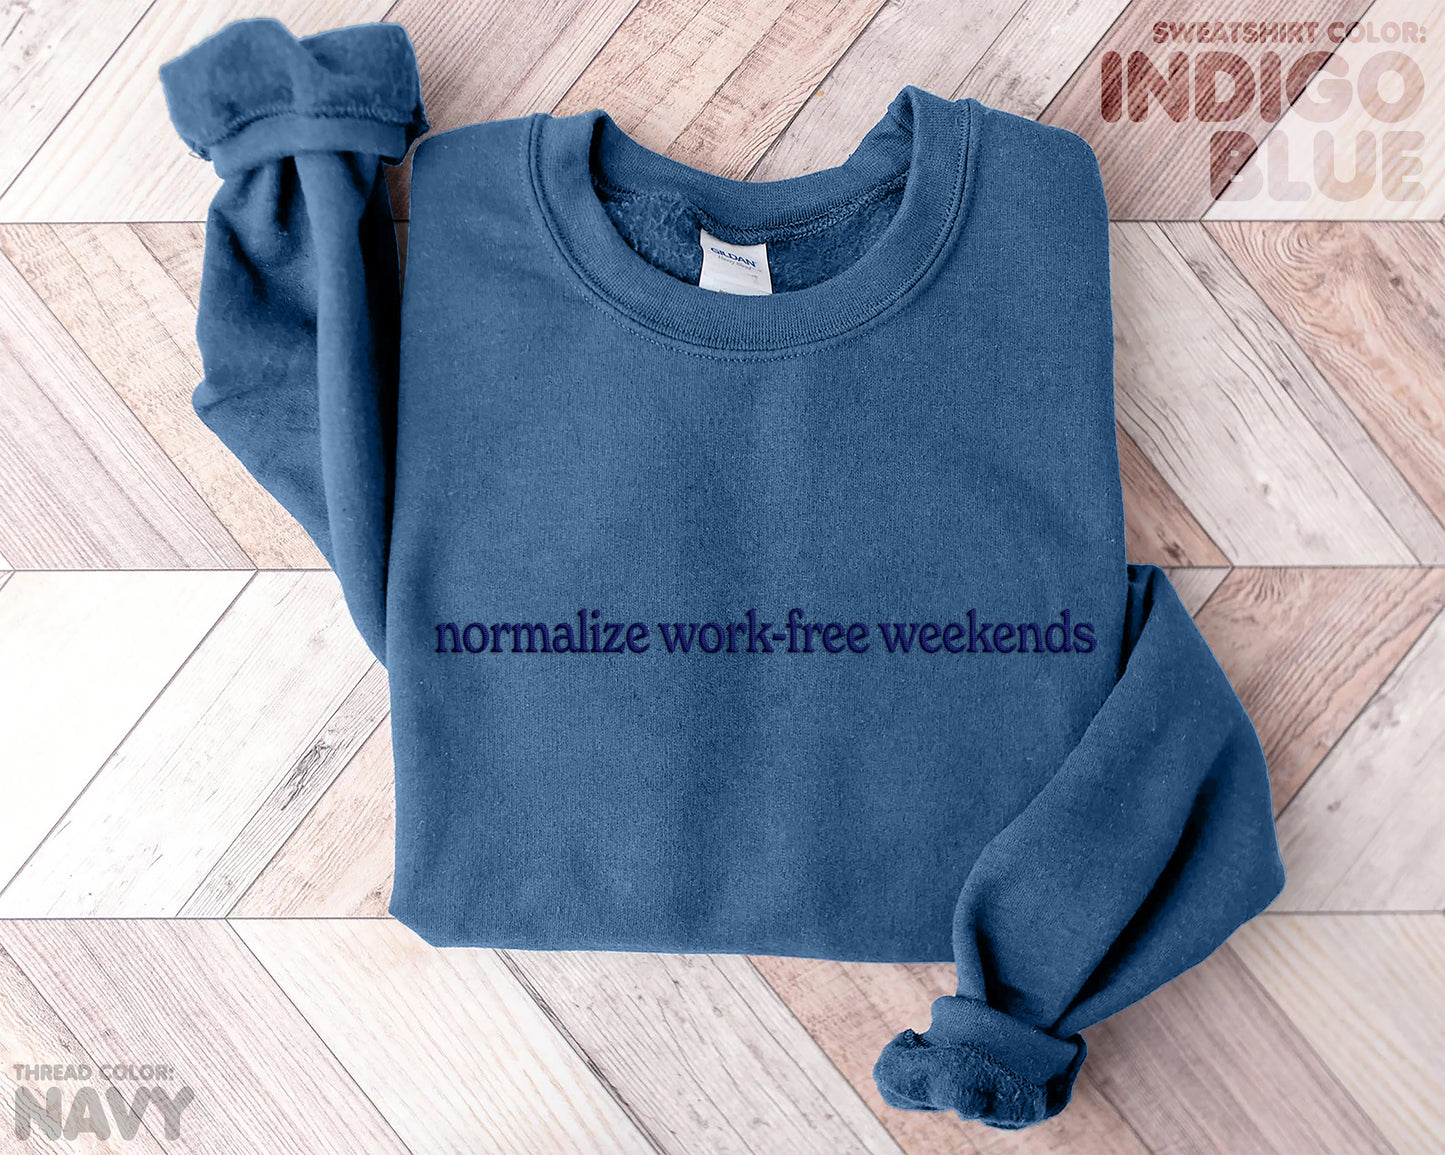 "normalize work-free weekends" embroidered sweatshirt